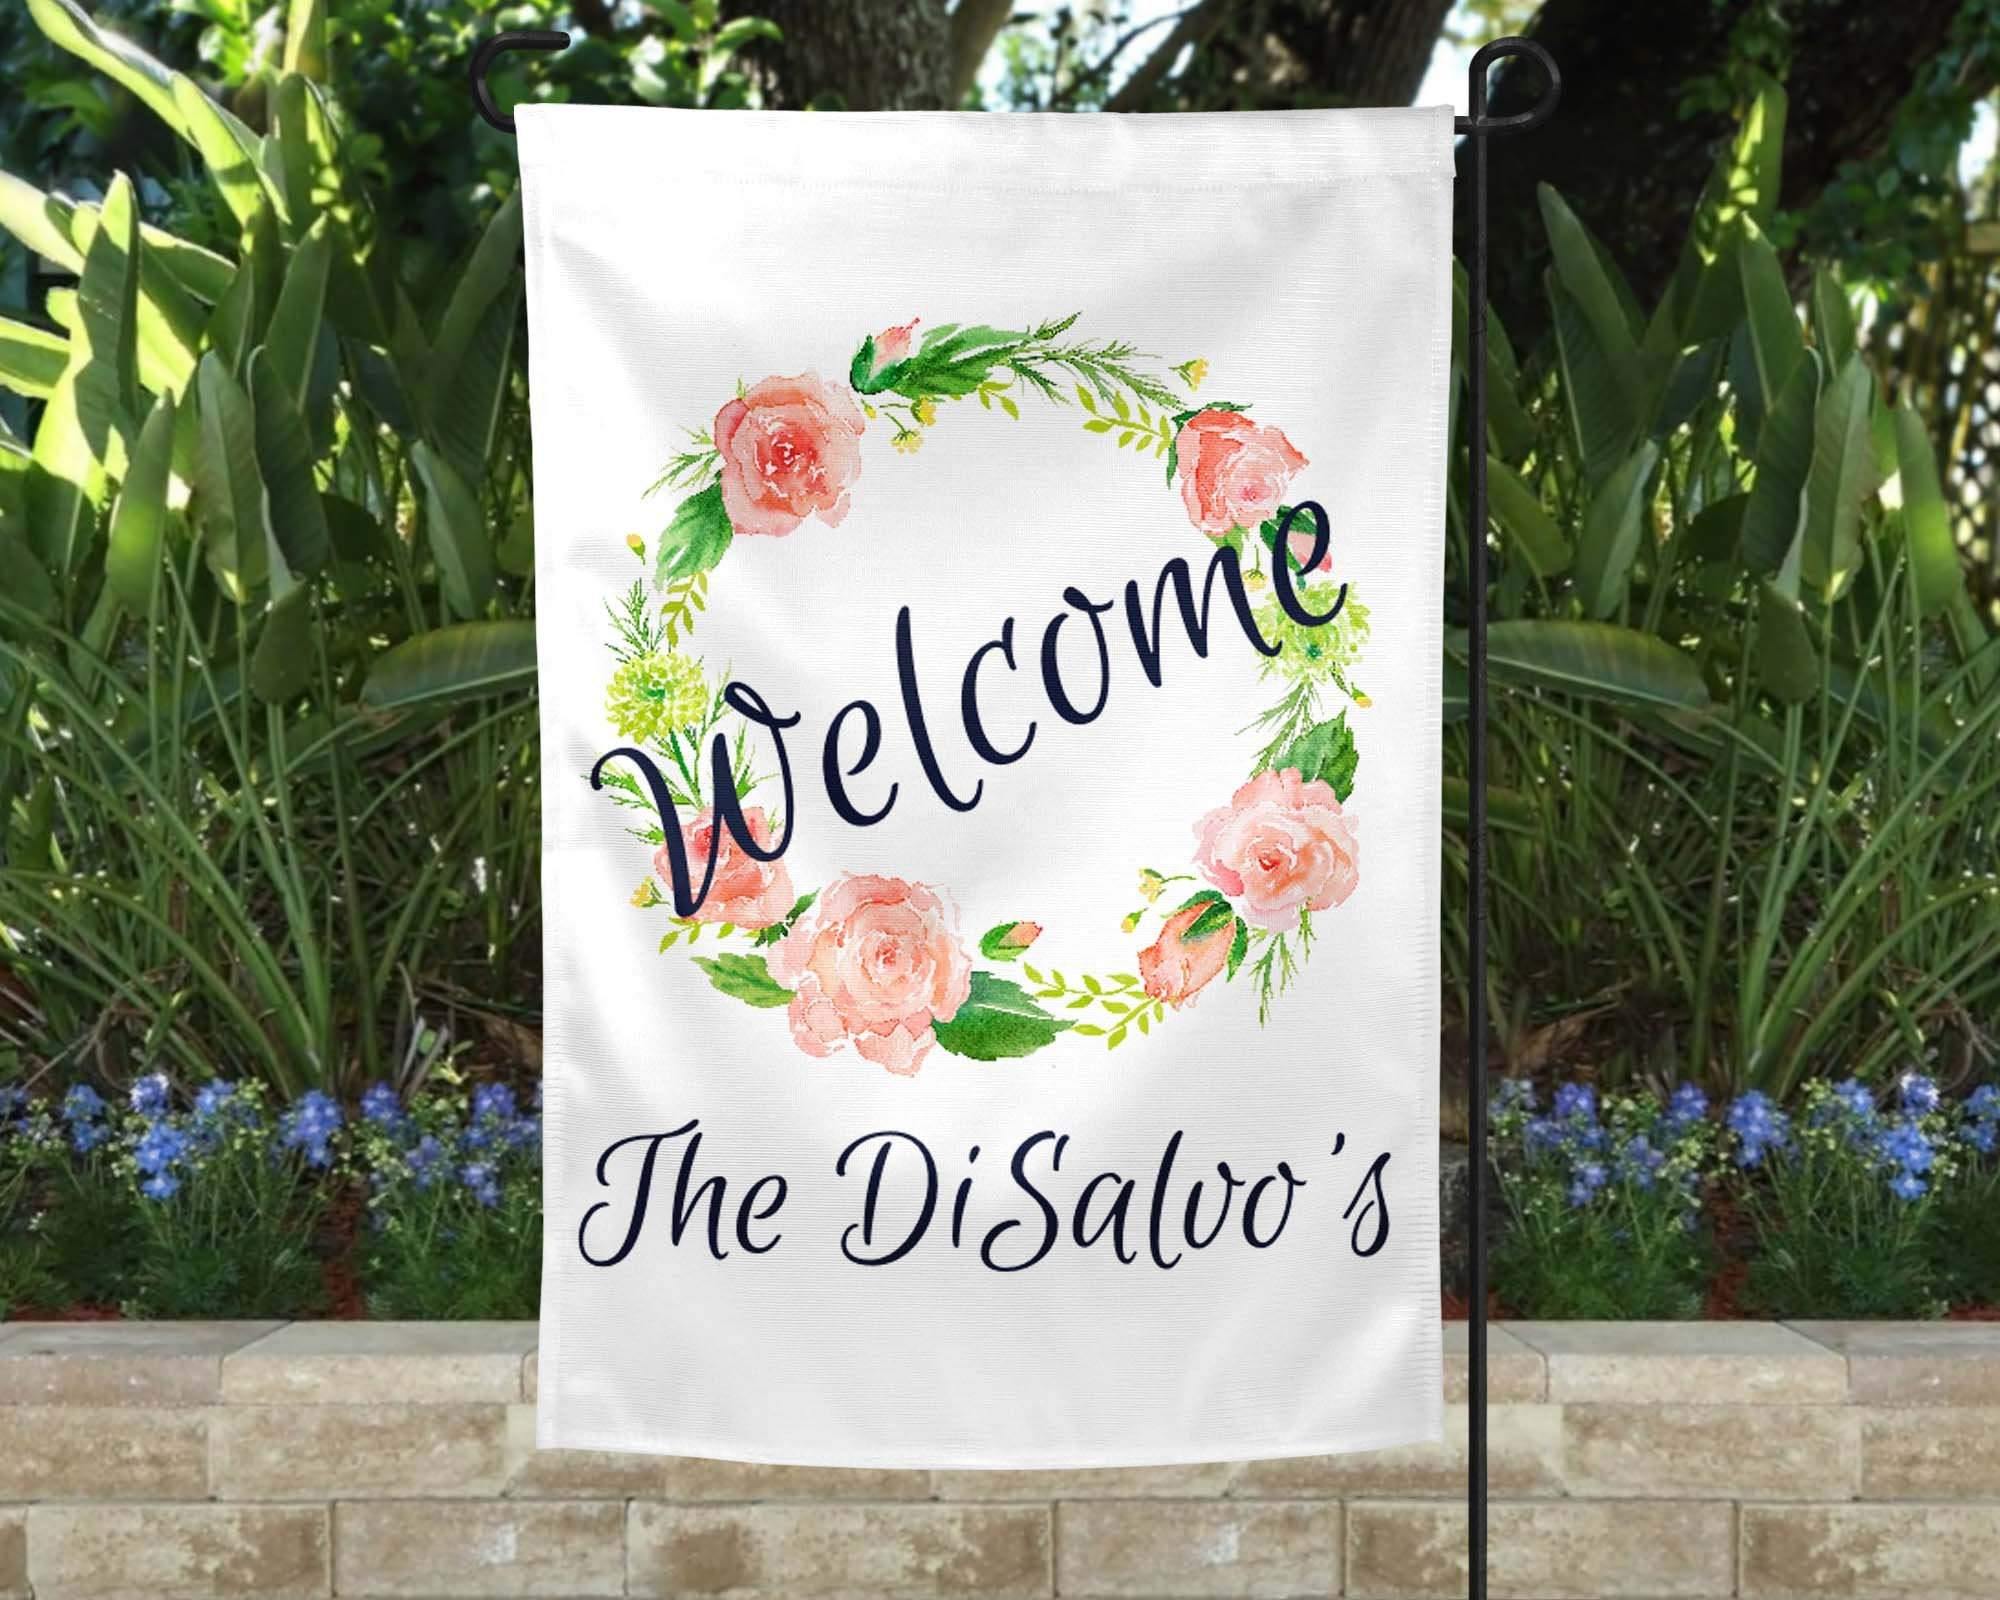 Personalized Garden Flag | Custom Yard Decorations | Welcome Wreath - This & That Solutions - Personalized Garden Flag | Custom Yard Decorations | Welcome Wreath - Personalized Gifts & Custom Home Decor